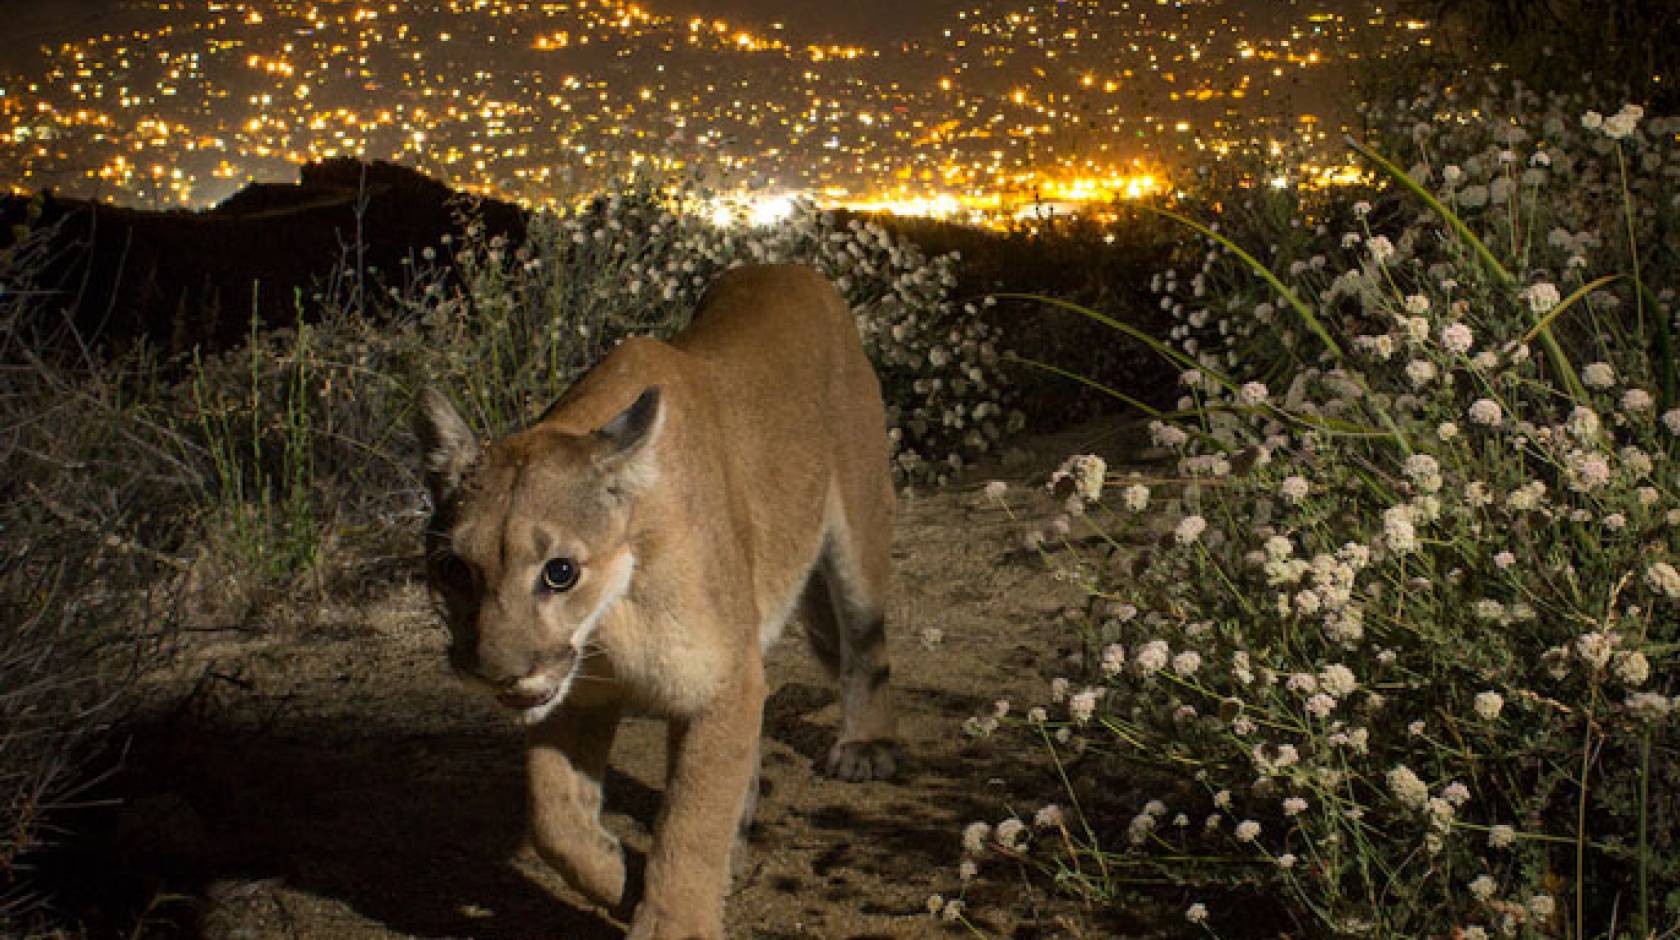 Mountain lion in Southern California, city in the background